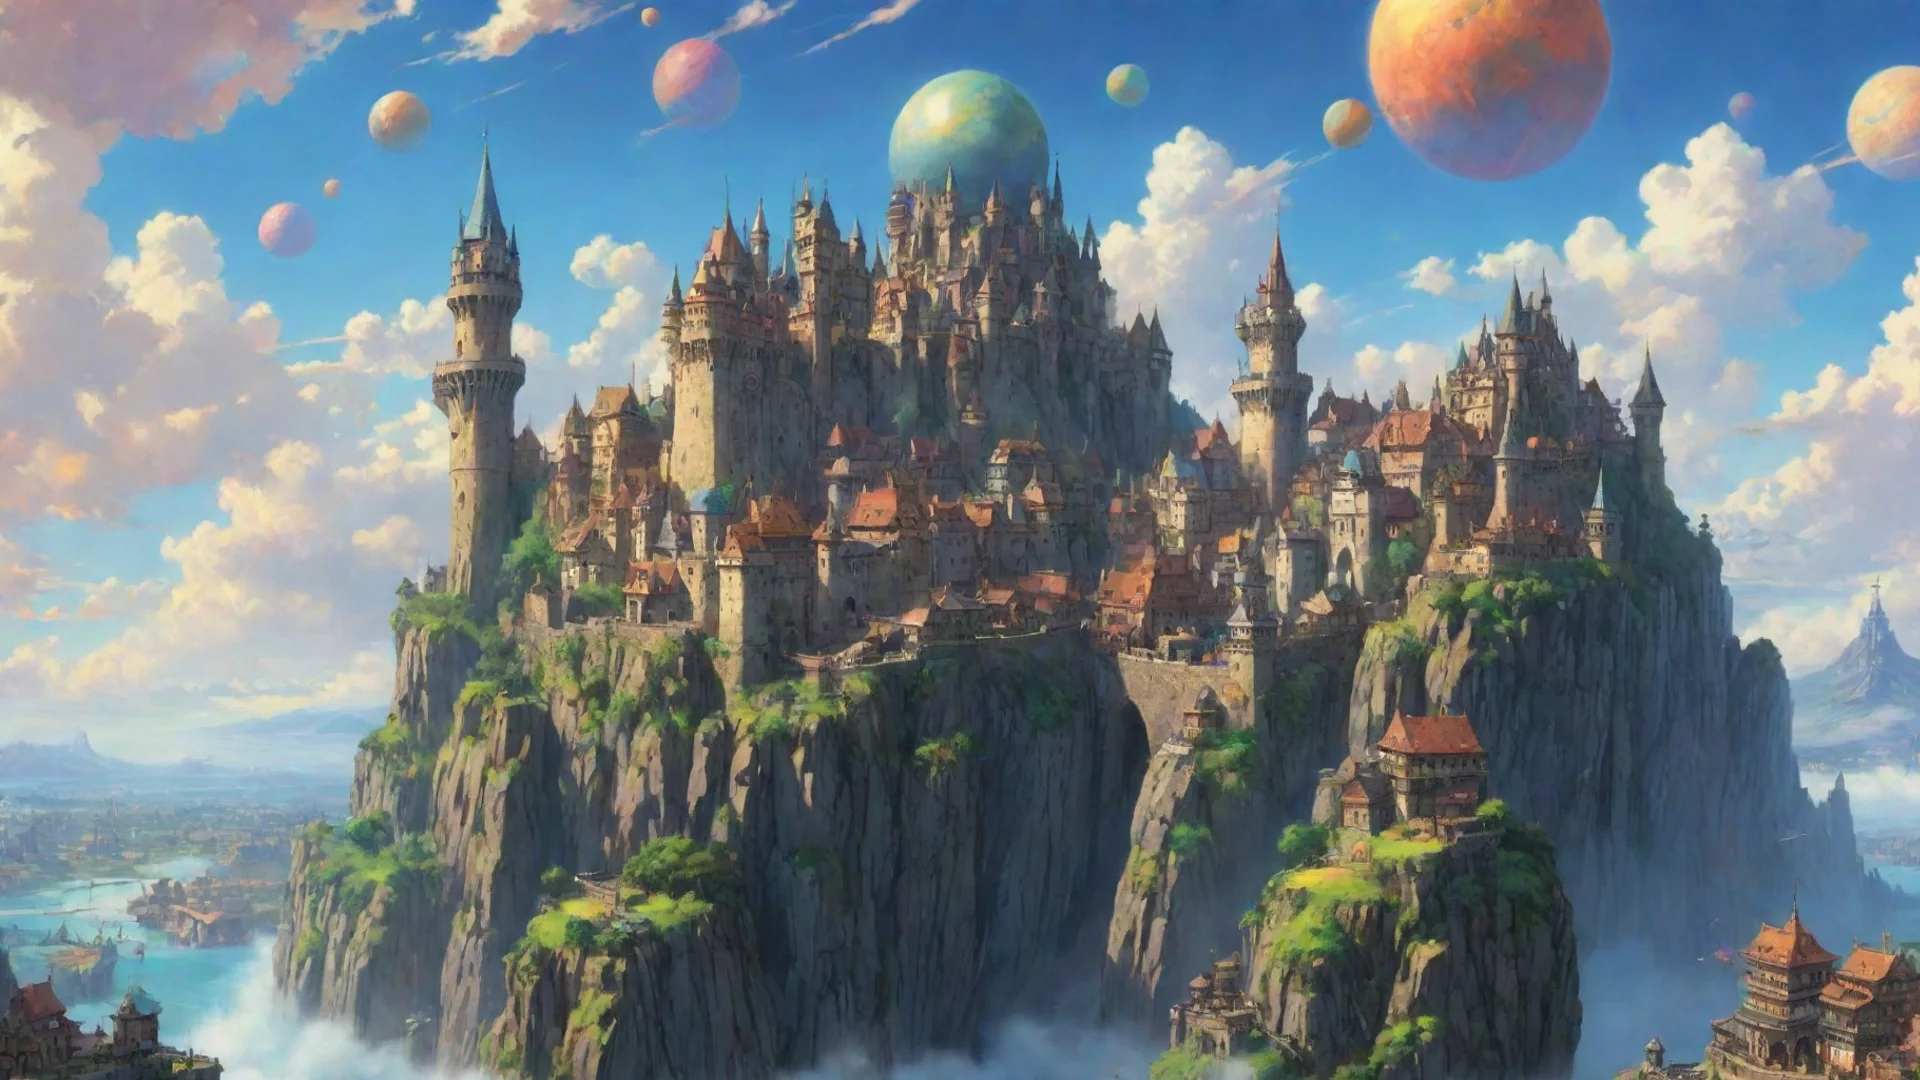 aiamazing fantasy art ghibli miyazaki hd best quality aesthetic flying castle colorful planets city fortress  awesome portrait 2 wide